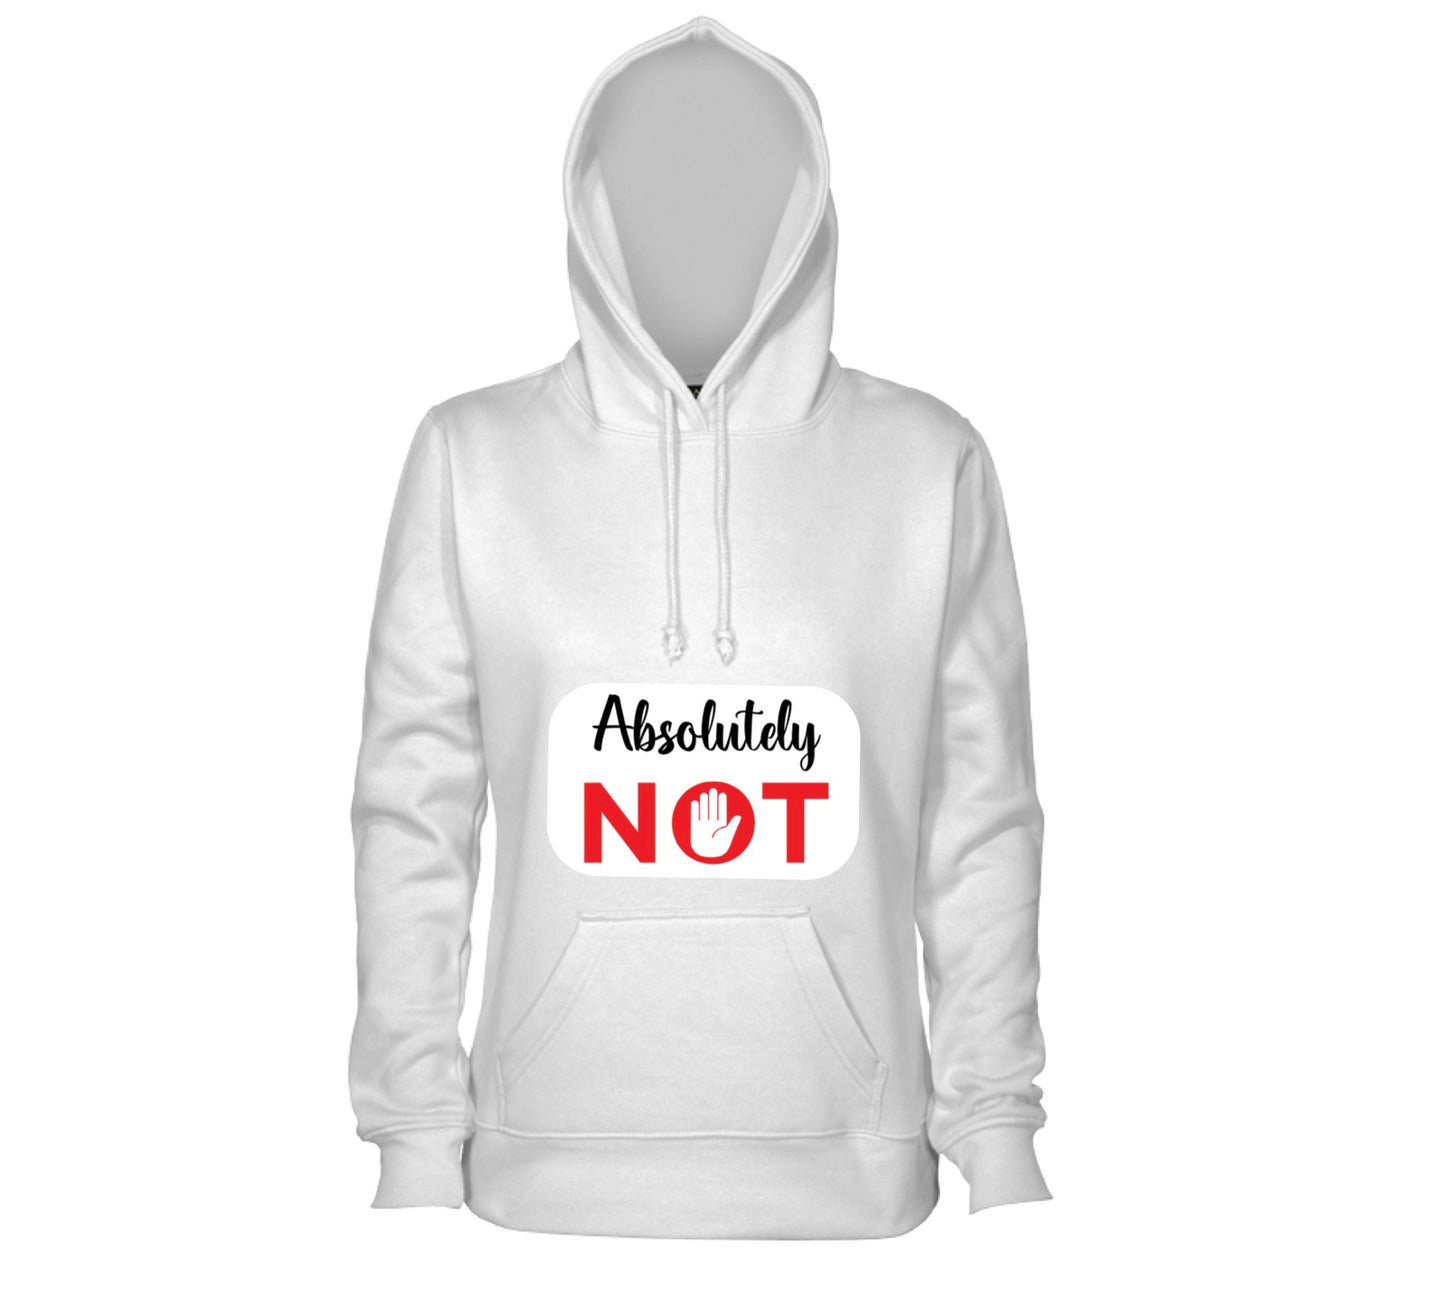 "Absolutely Not" Sweater